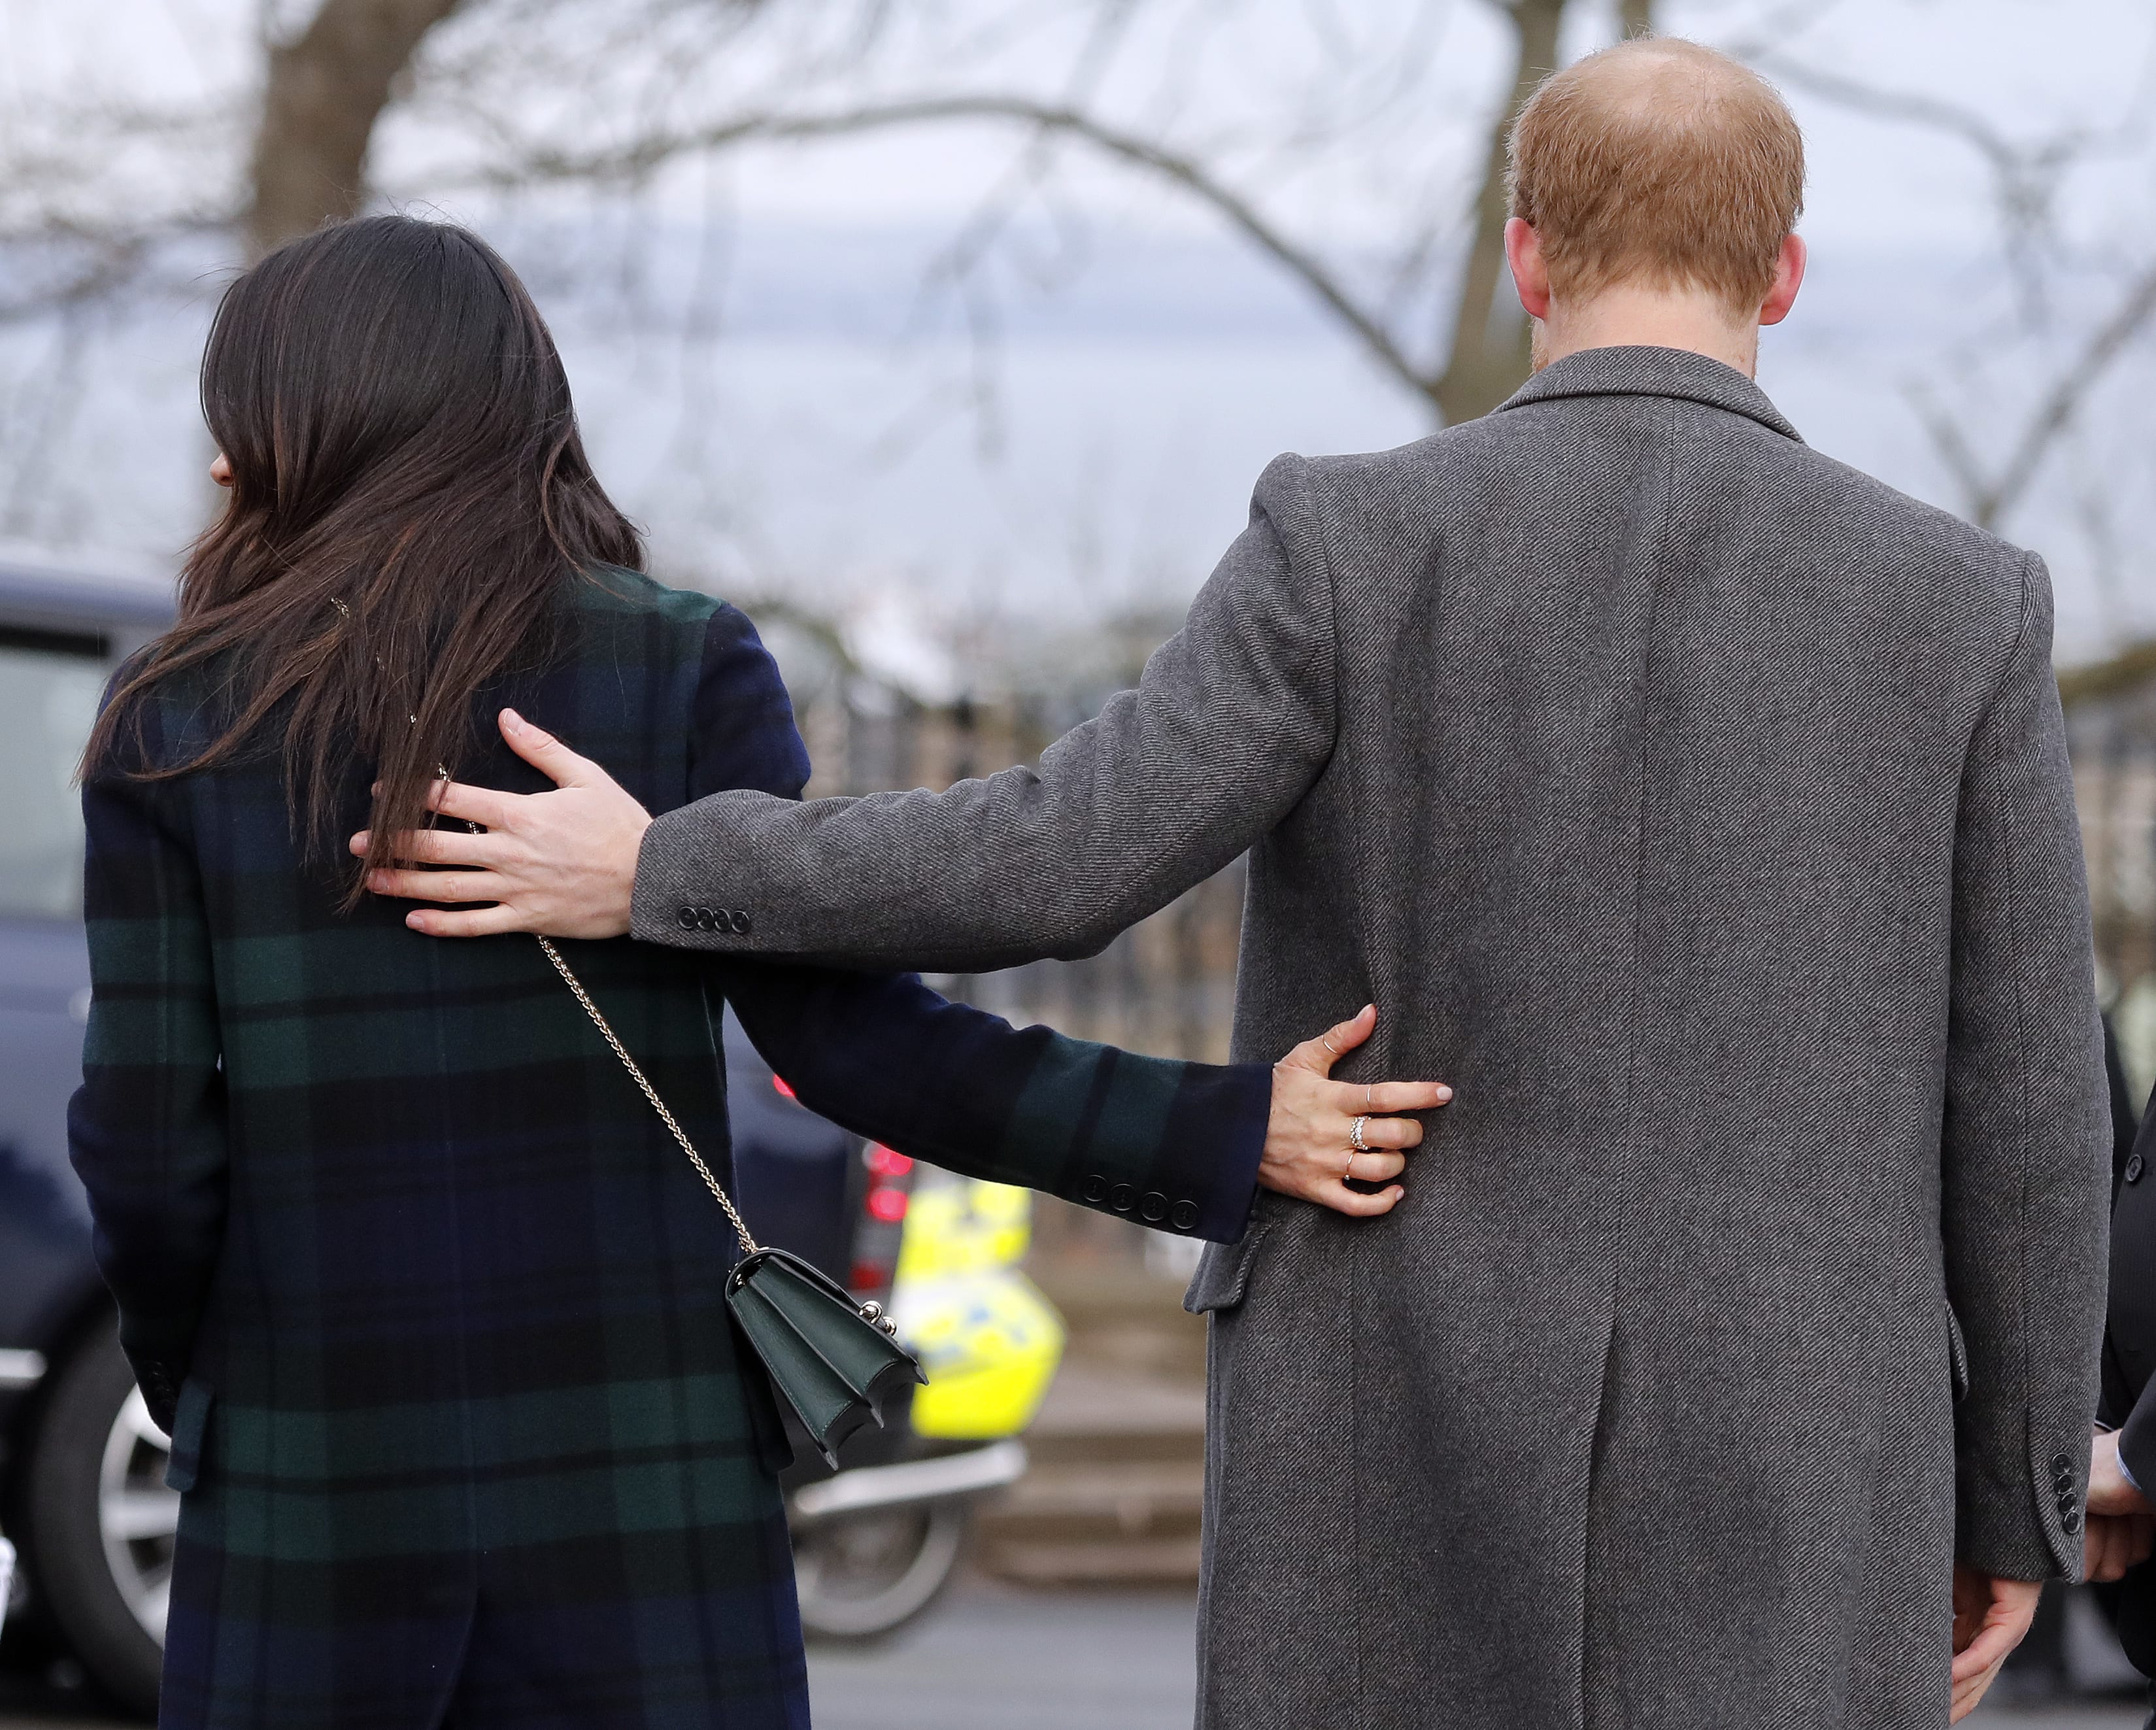 FILE - In this file photo dated Tuesday, Feb. 13, 2018, Britain's Prince Harry and his fiancee Meghan Markle arrive at Edinburgh Castle in Edinburgh, Scotland. Kensington Palace said Monday May 14, 2018, that Britain’s Prince Harry and Meghan Markle are requesting “understanding and respect” for Markle’s father after a celebrity news site reported he would not be coming to the royal wedding to walk his daughter down the aisle. (AP Photo/Frank Augstein, FILE)